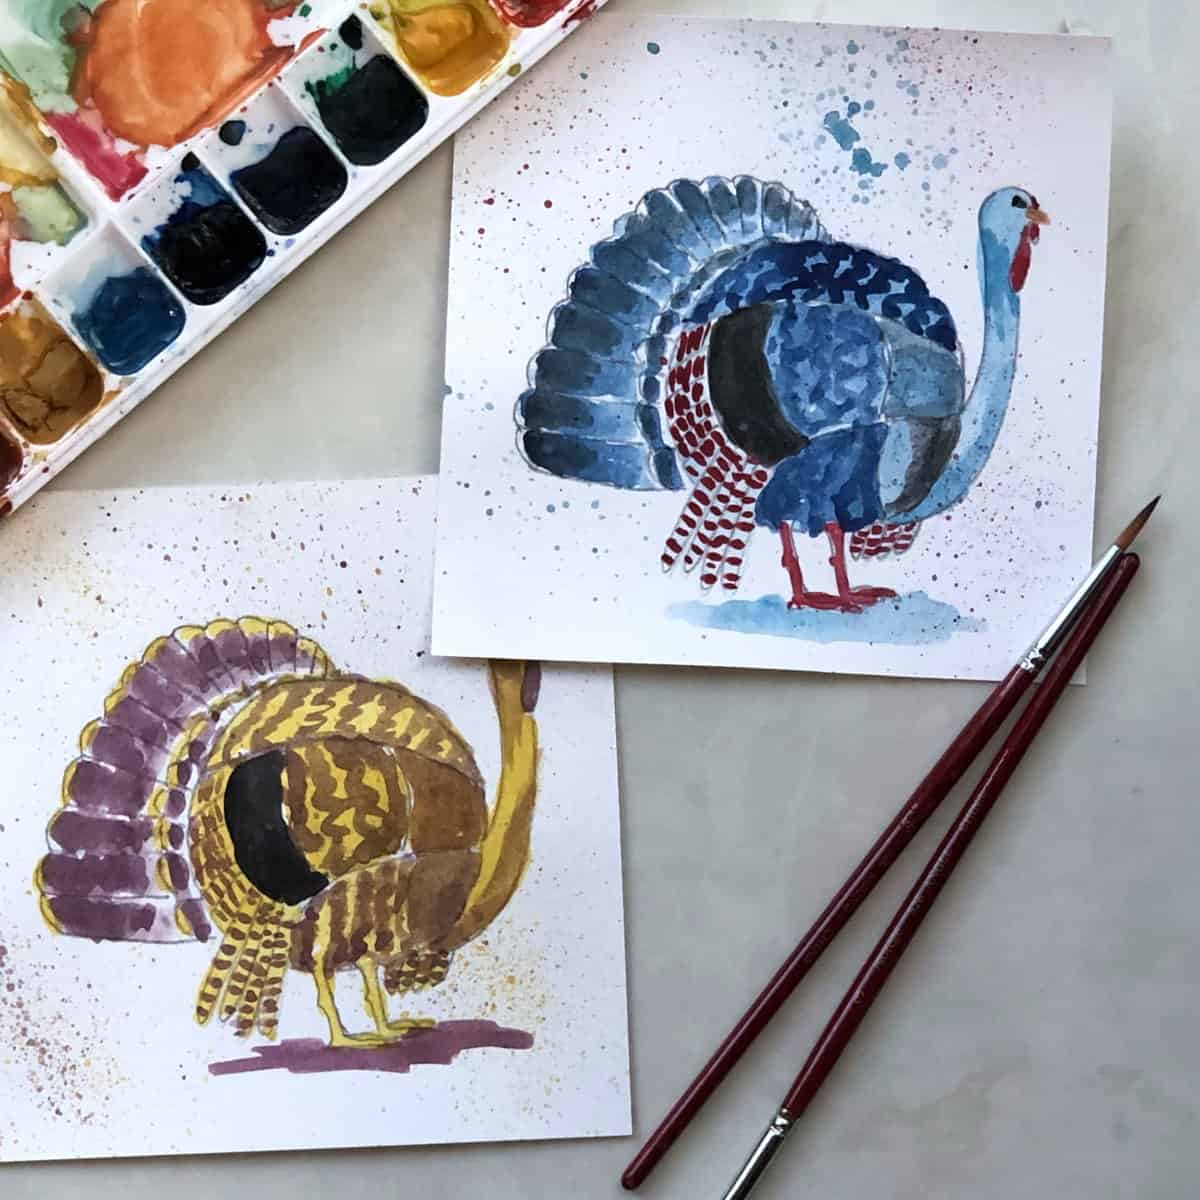 Two watercolor paintings of turkeys in bright colors with splatters next to a watercolor paint set and some paint brushes.